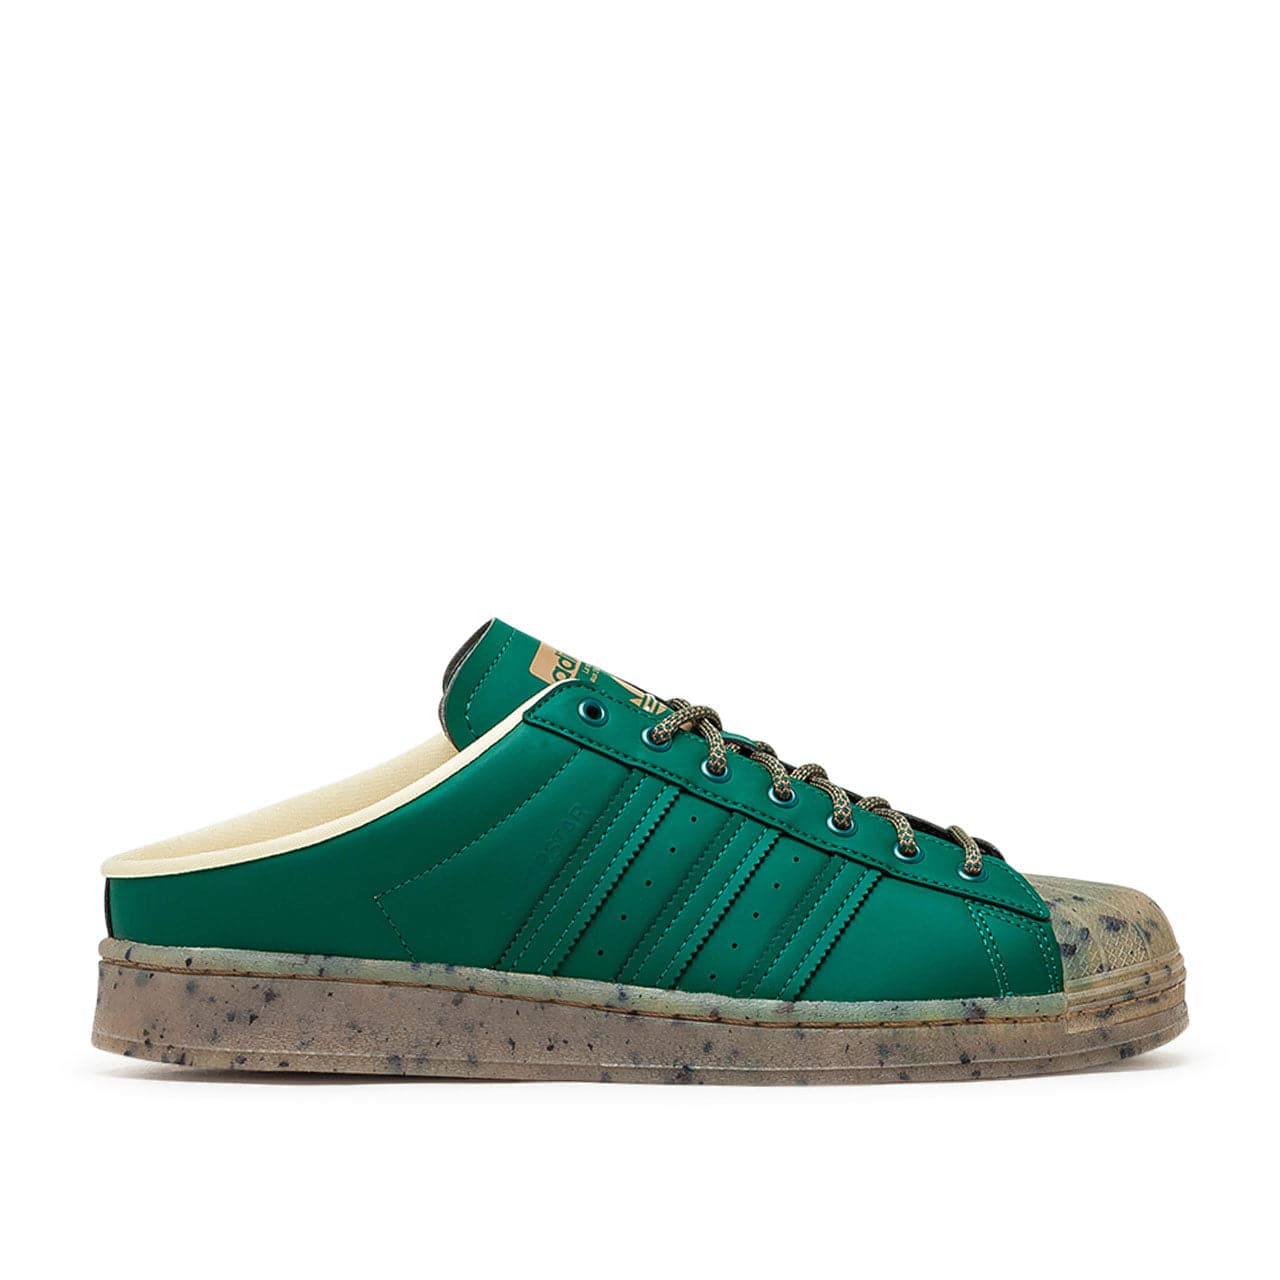 Staat experimenteel Zwerver adidas Superstar Plant and Grow Mules (Green) GY9647 – Allike Store